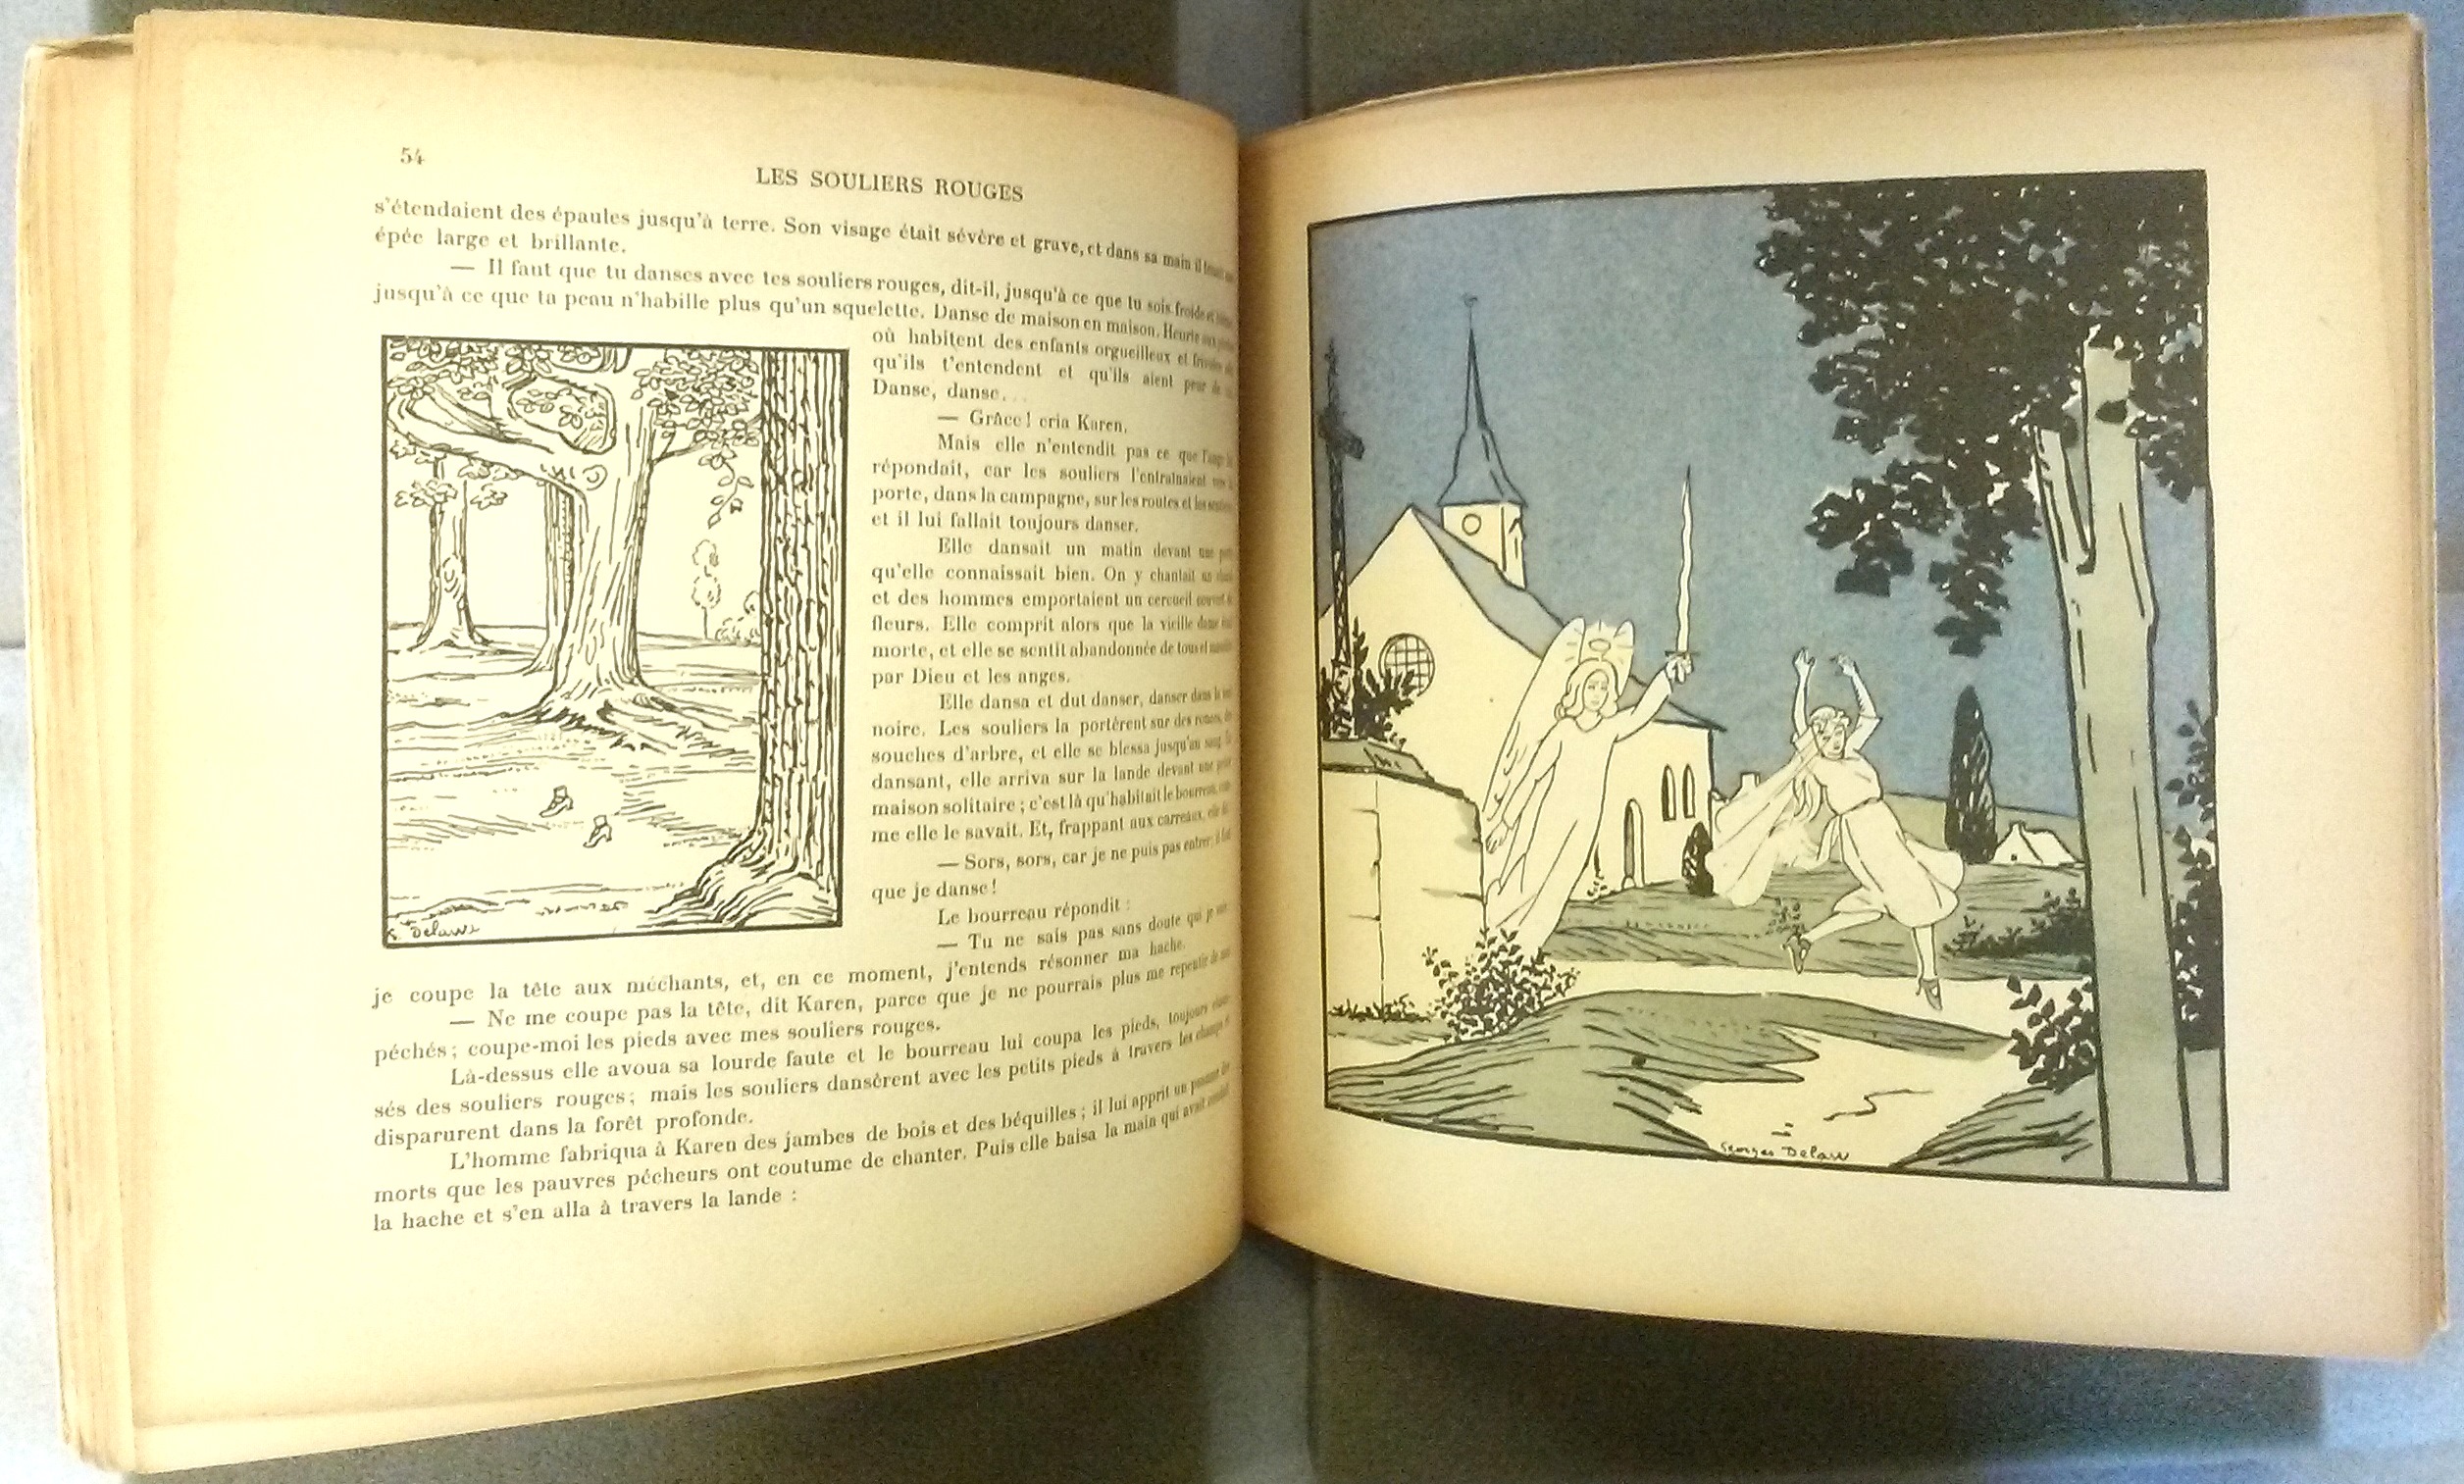 Page spread from 1920 French translation of The Red Shoes. On the left, a black and white illustration of the red shoes dancing alone with Karen's amputated feet. On the right, a full-color plate of Karen dancing in the churchyard as the angel threatens her with his sword